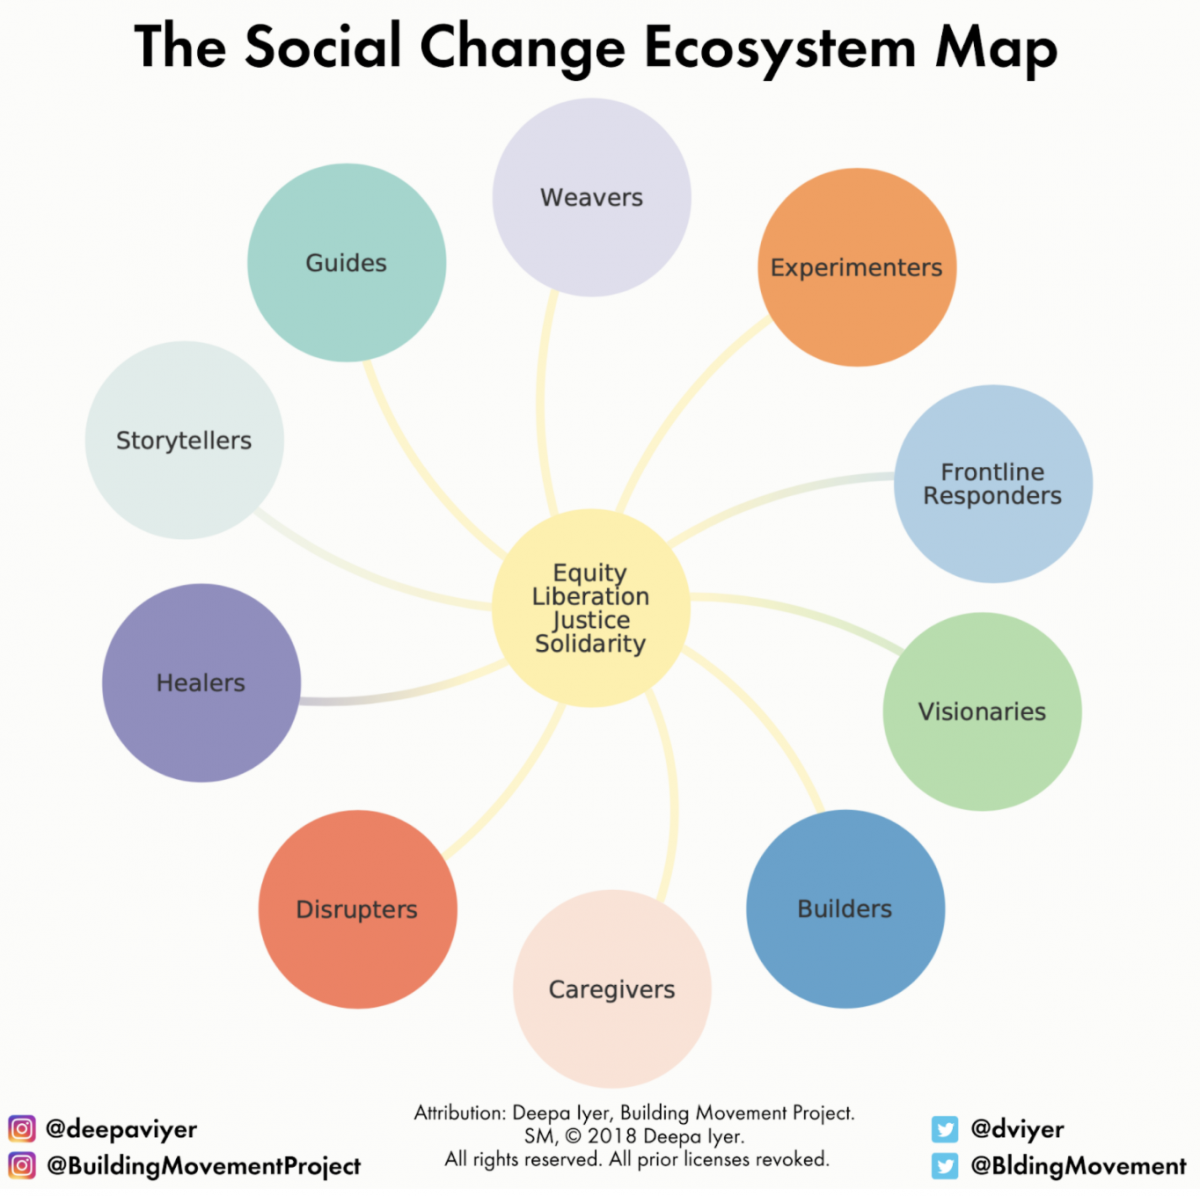 An image of the Social Change Ecosystem Map, accessible version can be found via this link: https://buildingmovement.org/wp-content/uploads/2021/03/IyerEcosystemReaderFriendly.pdf